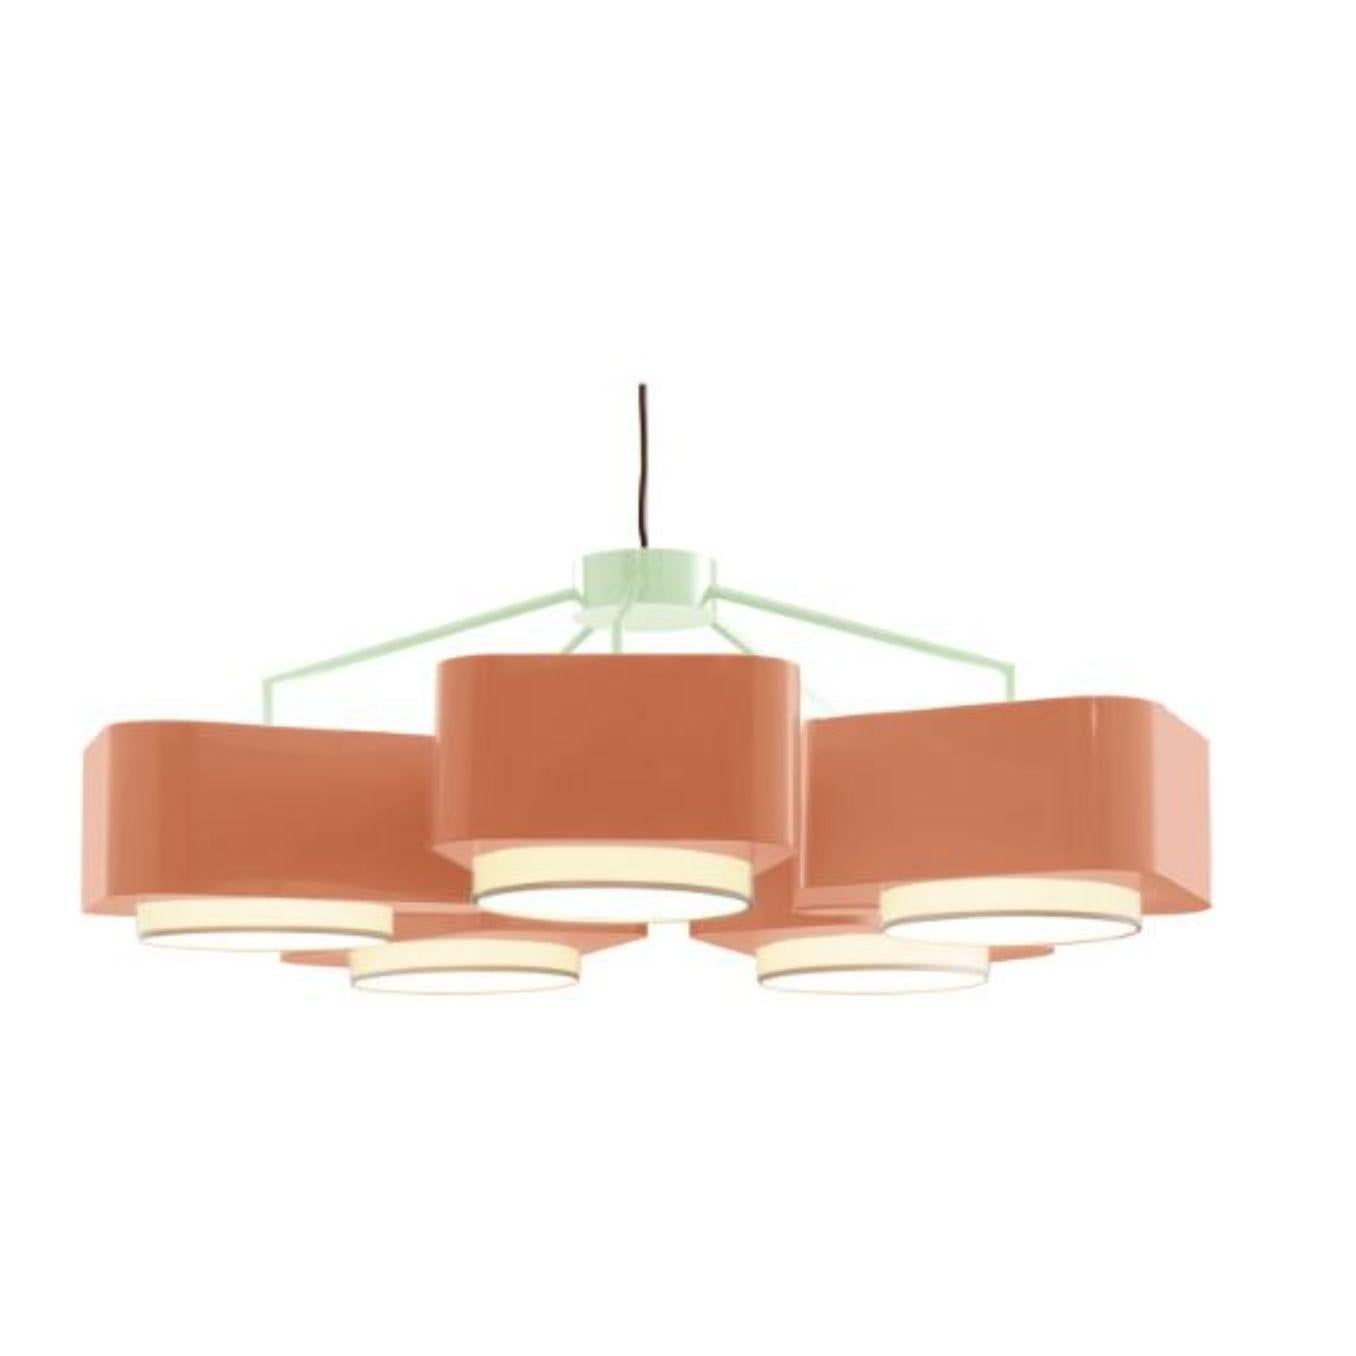 Taupe and copper carousel suspension lamp by Dooq
Dimensions: W 110 x D 110 x H 40 cm
Materials: lacquered metal.
abat-jour: cotton
Also available in different colors.

Information:
230V/50Hz
E27/5x20W LED
120V/60Hz
E26/5x15W LED
bulbs